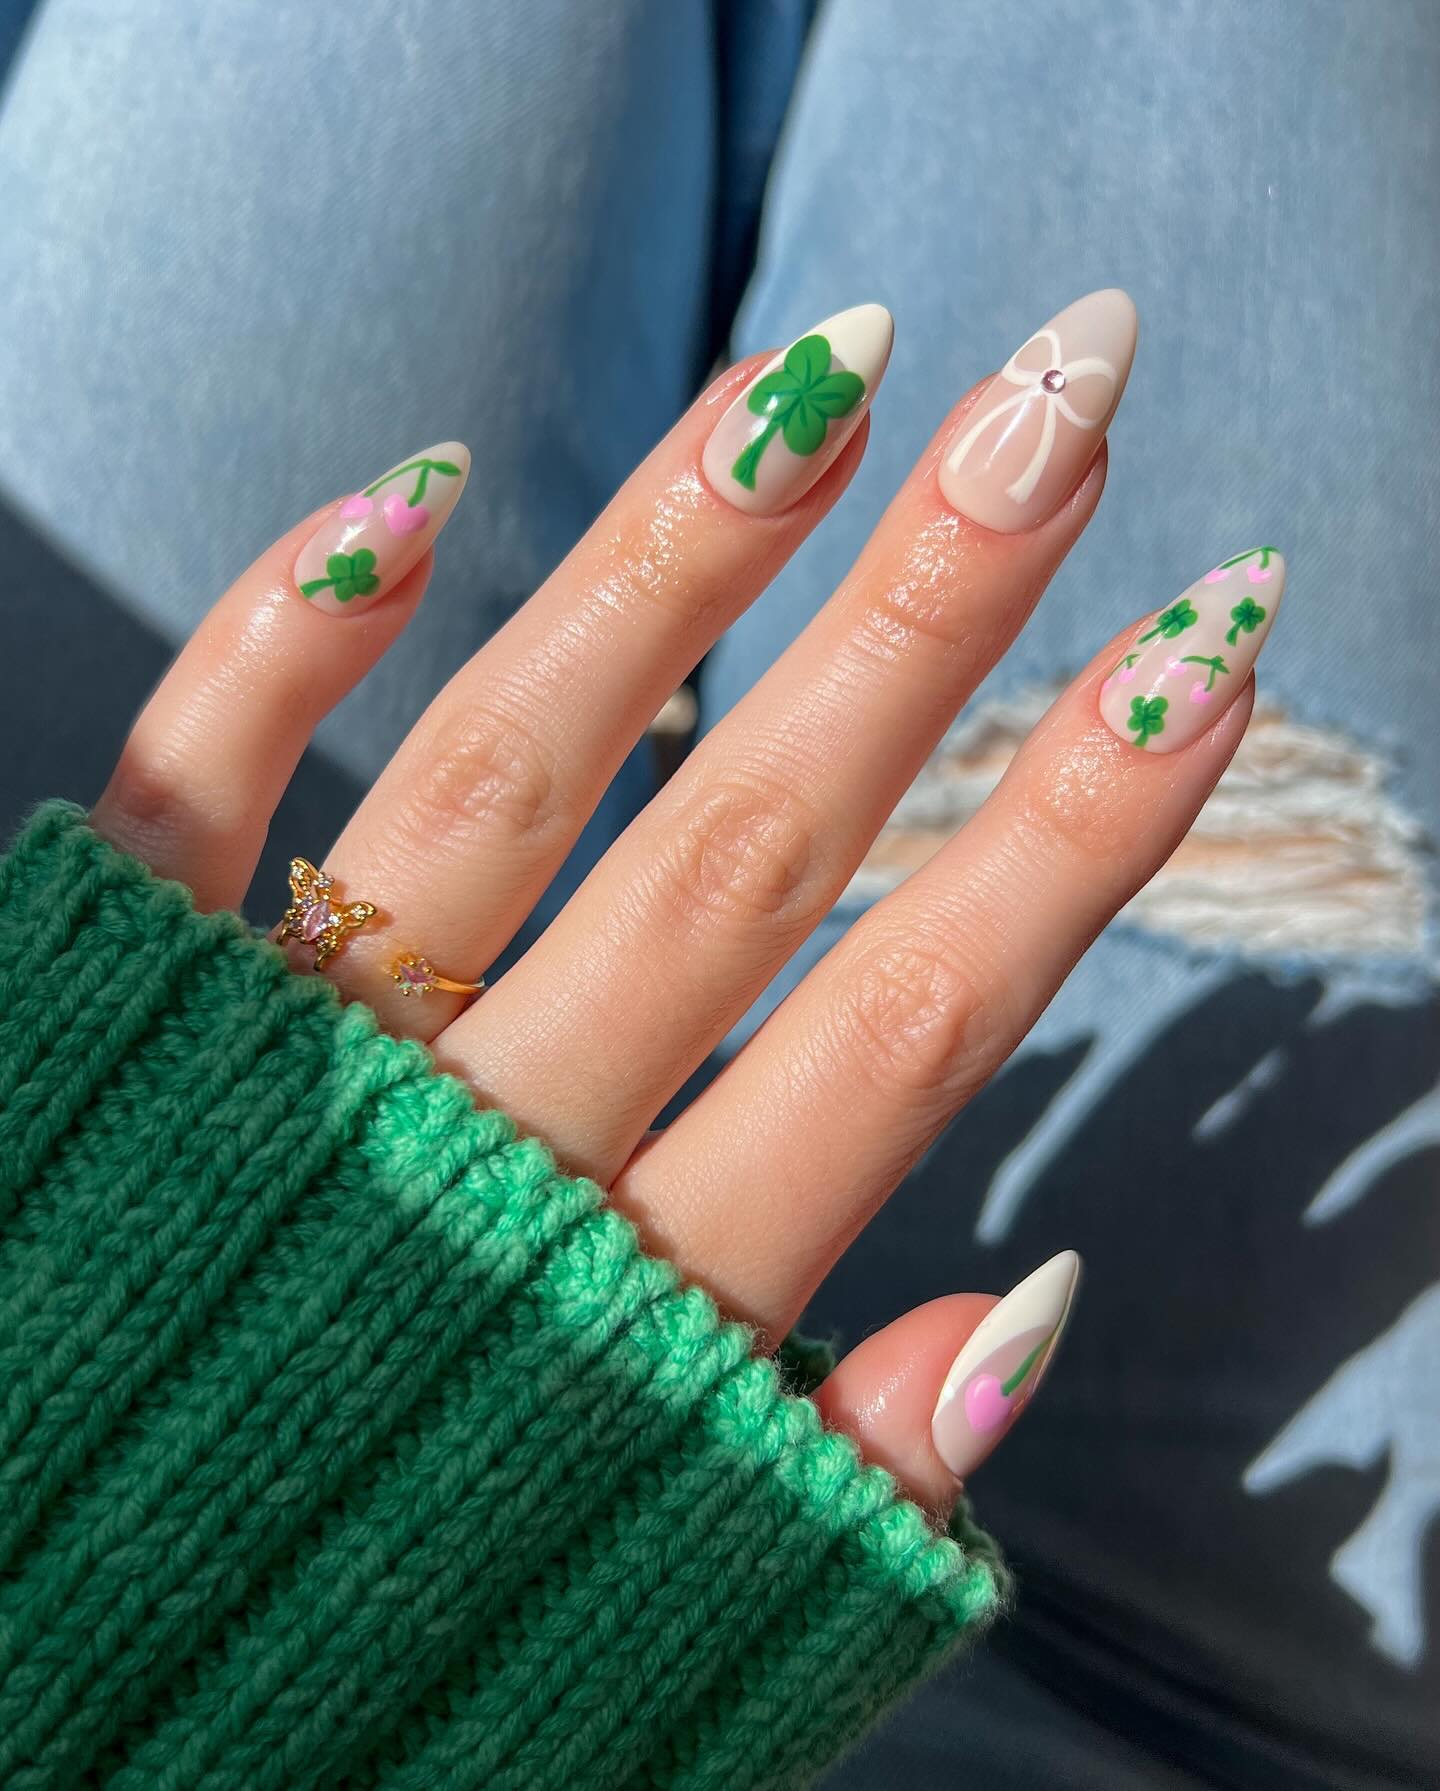 100+ Short Nail Designs You’ll Want To Try This Year images 90